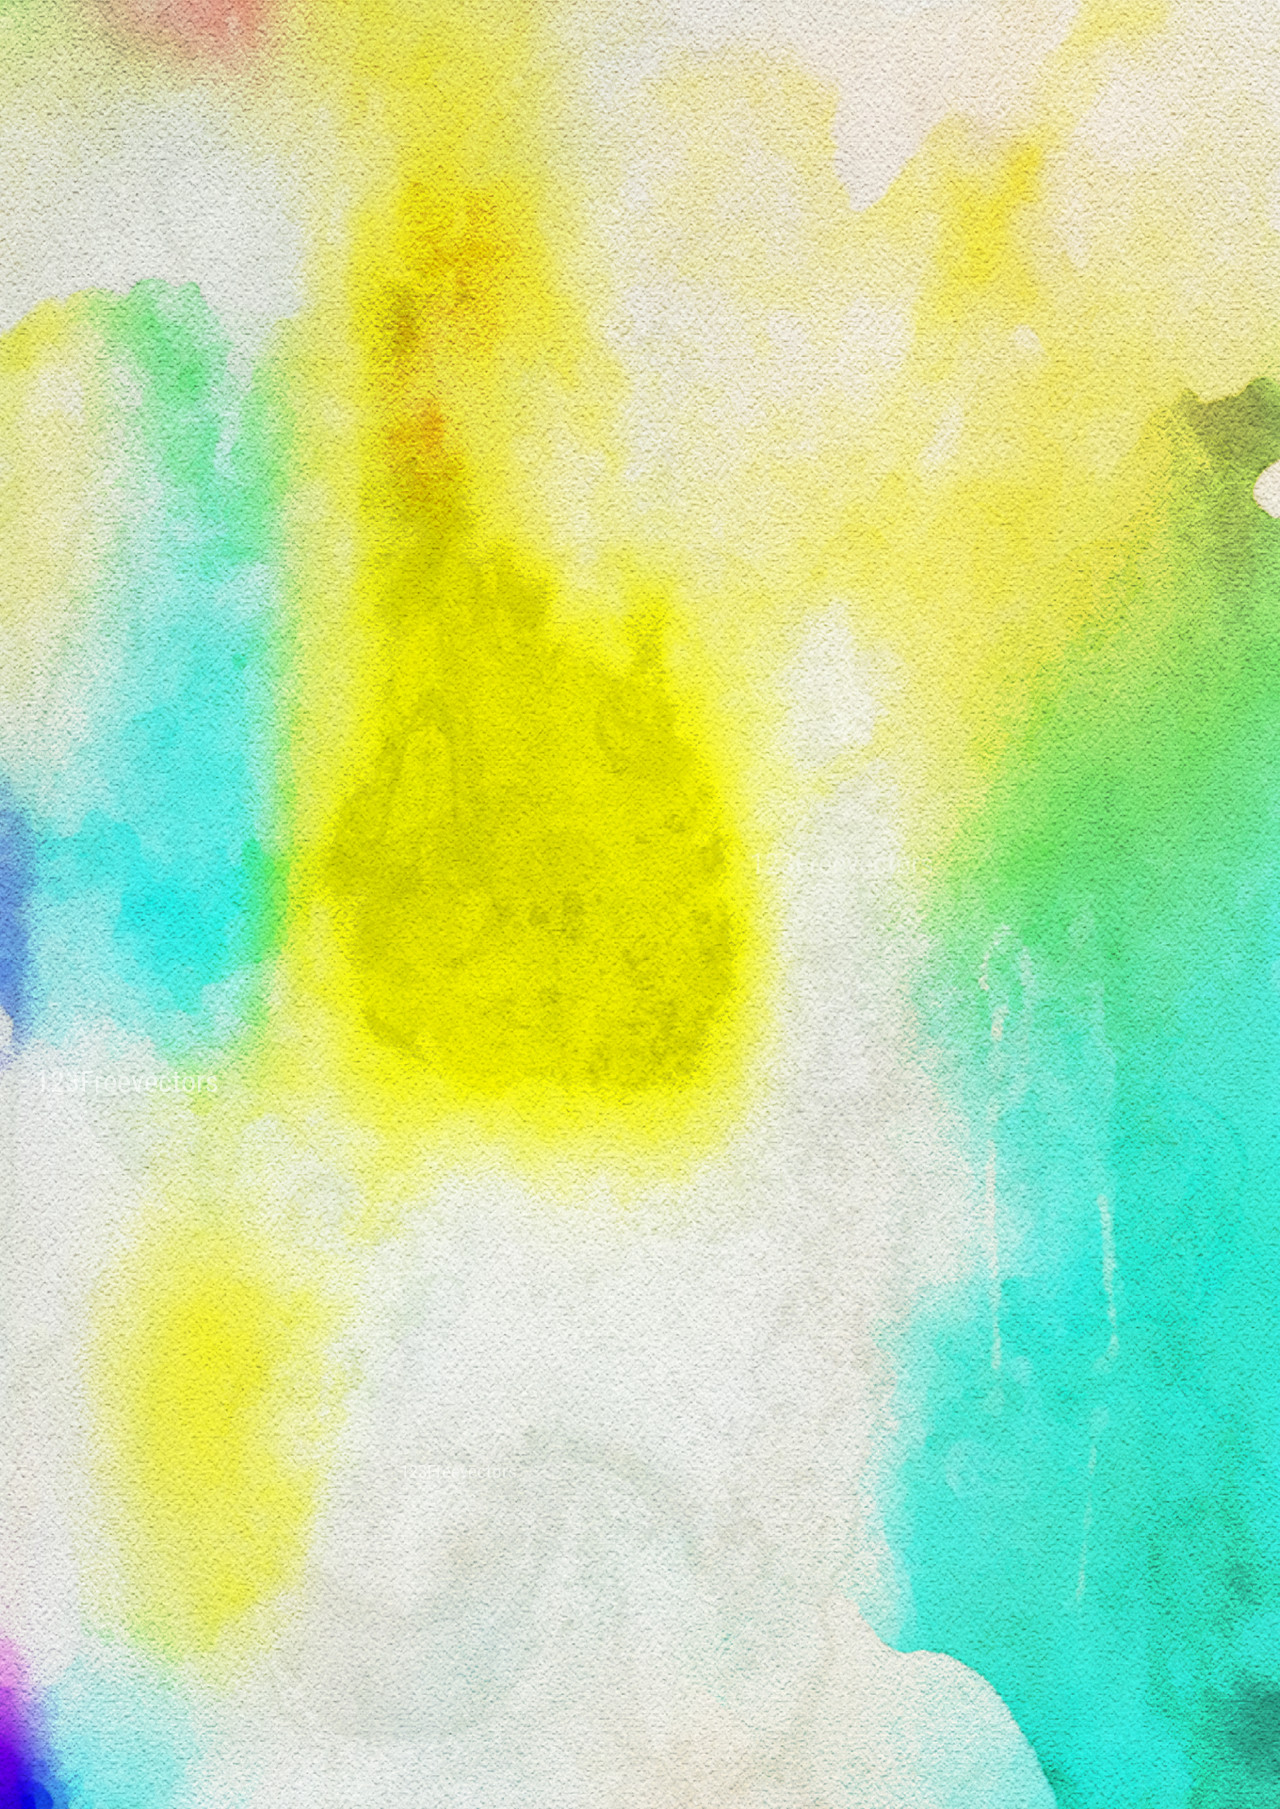 Blue Yellow and White Watercolor Background Texture Image